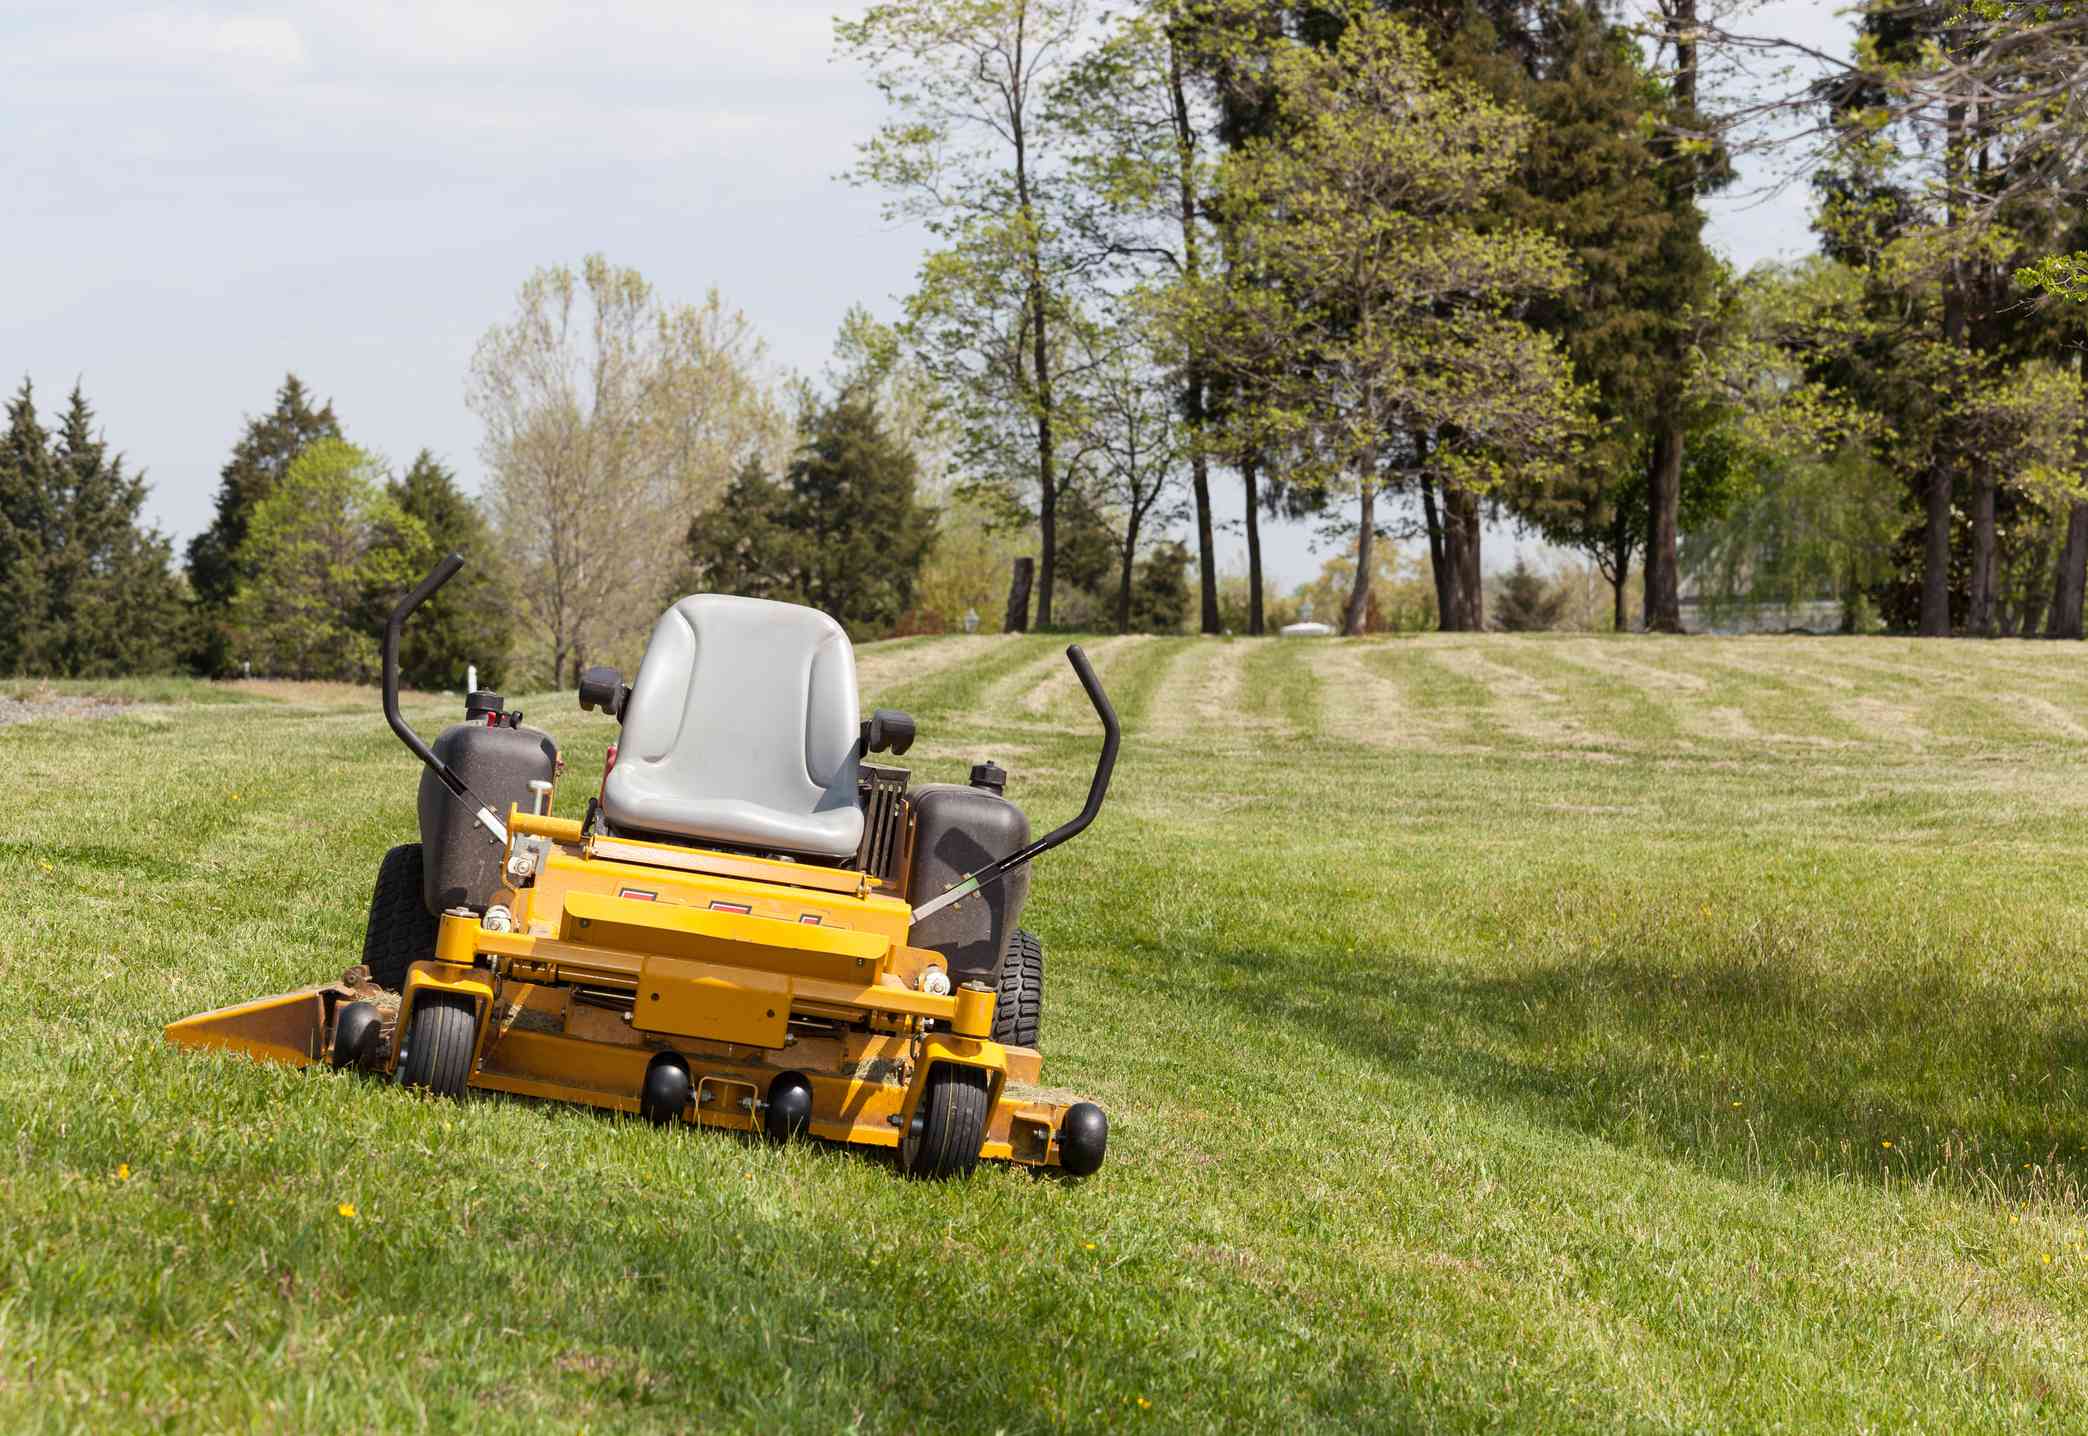 Searching a zero-turn mower for 10 acres? Here are our top picks!